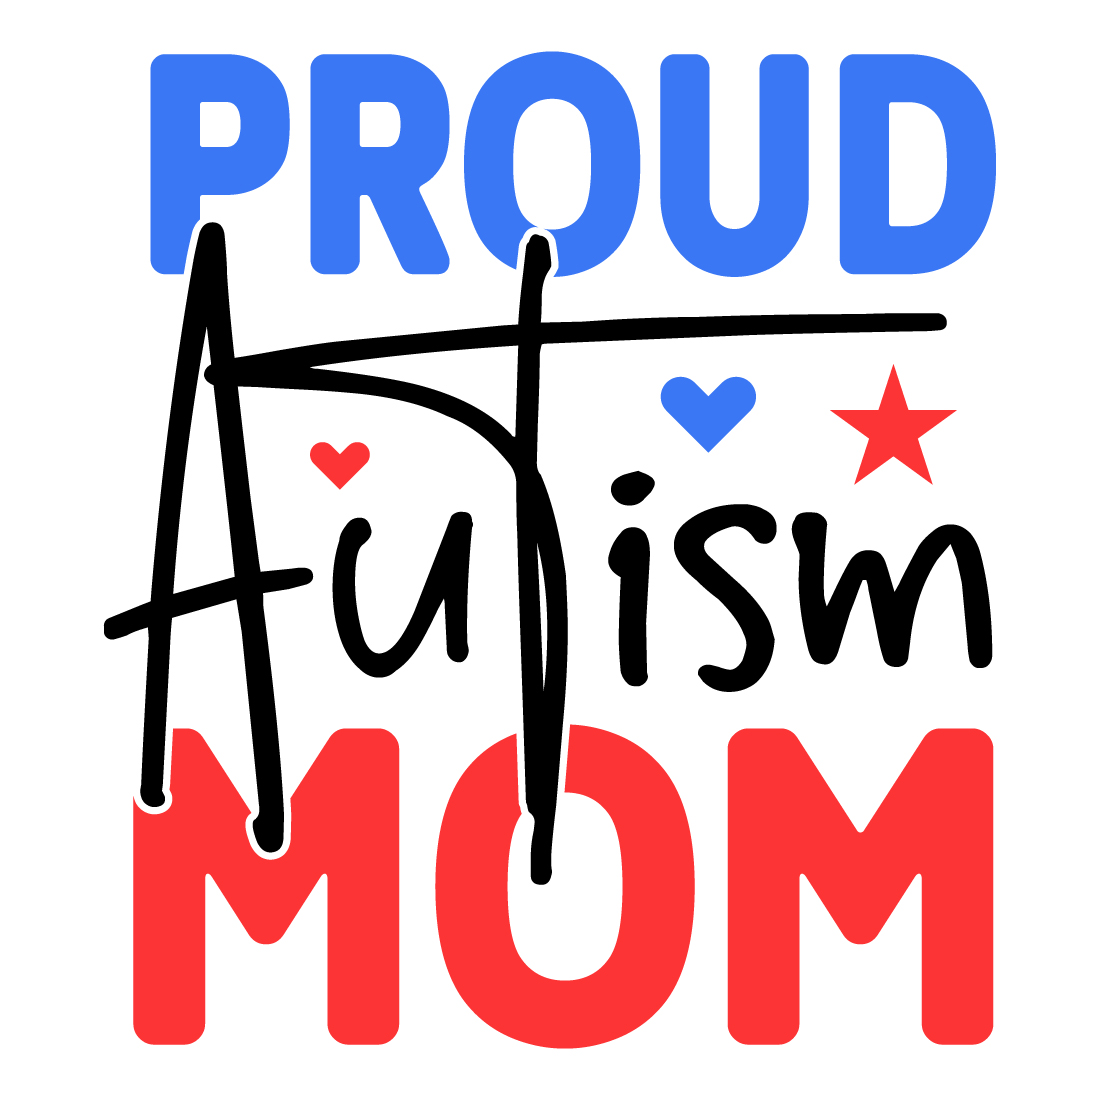 Proud Autism Mom cover image.